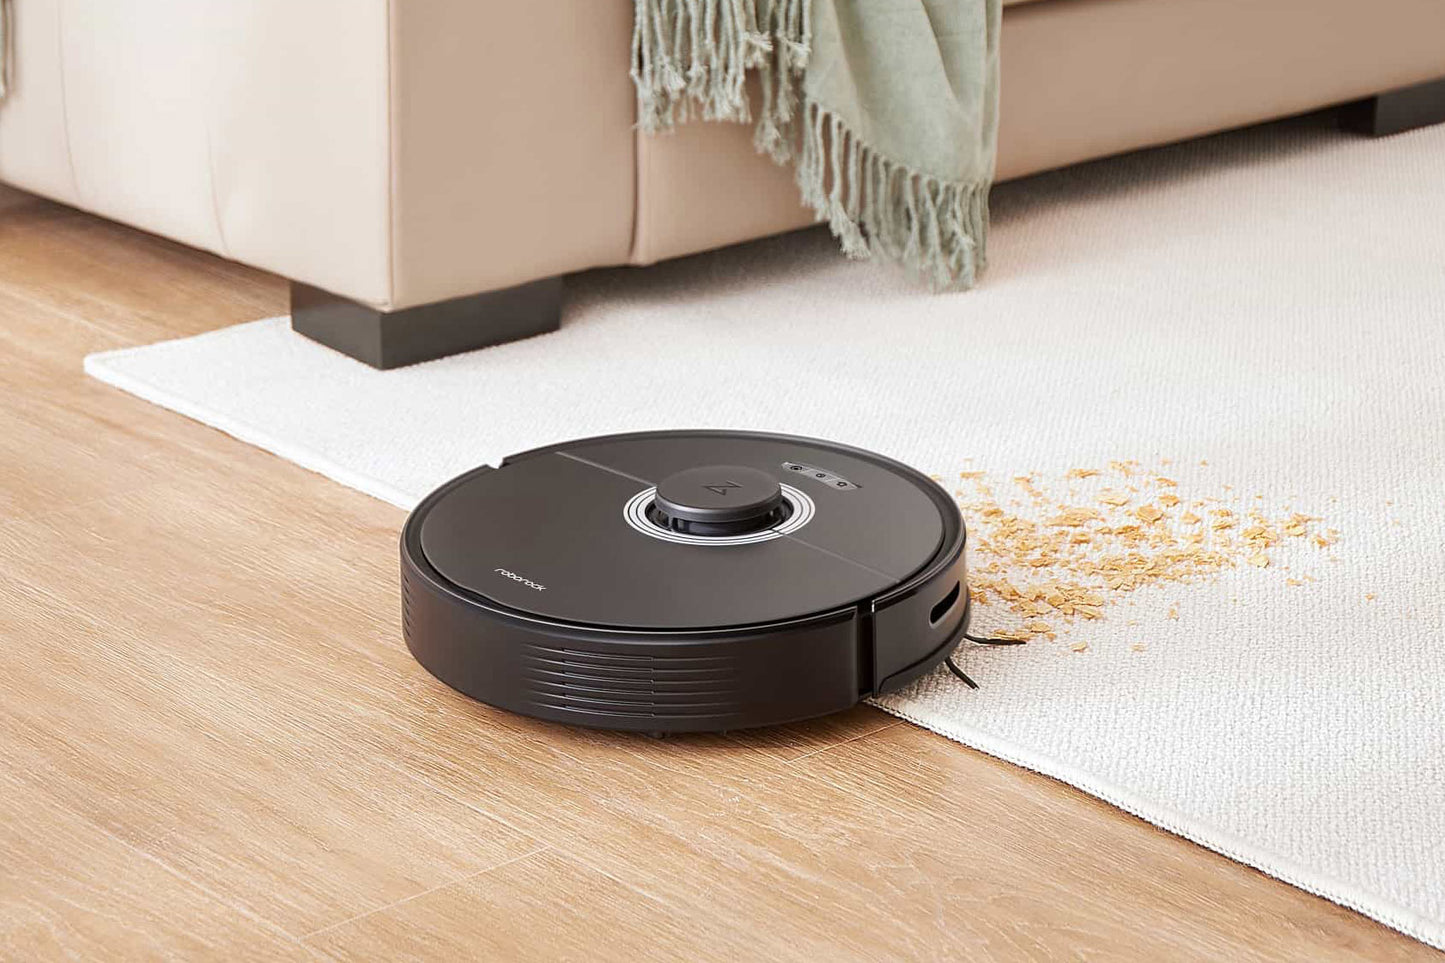 (70% OFF) Effortless Cleaning Starts Now: Introducing the Ultraclean Robot Vacuum Cleaner!